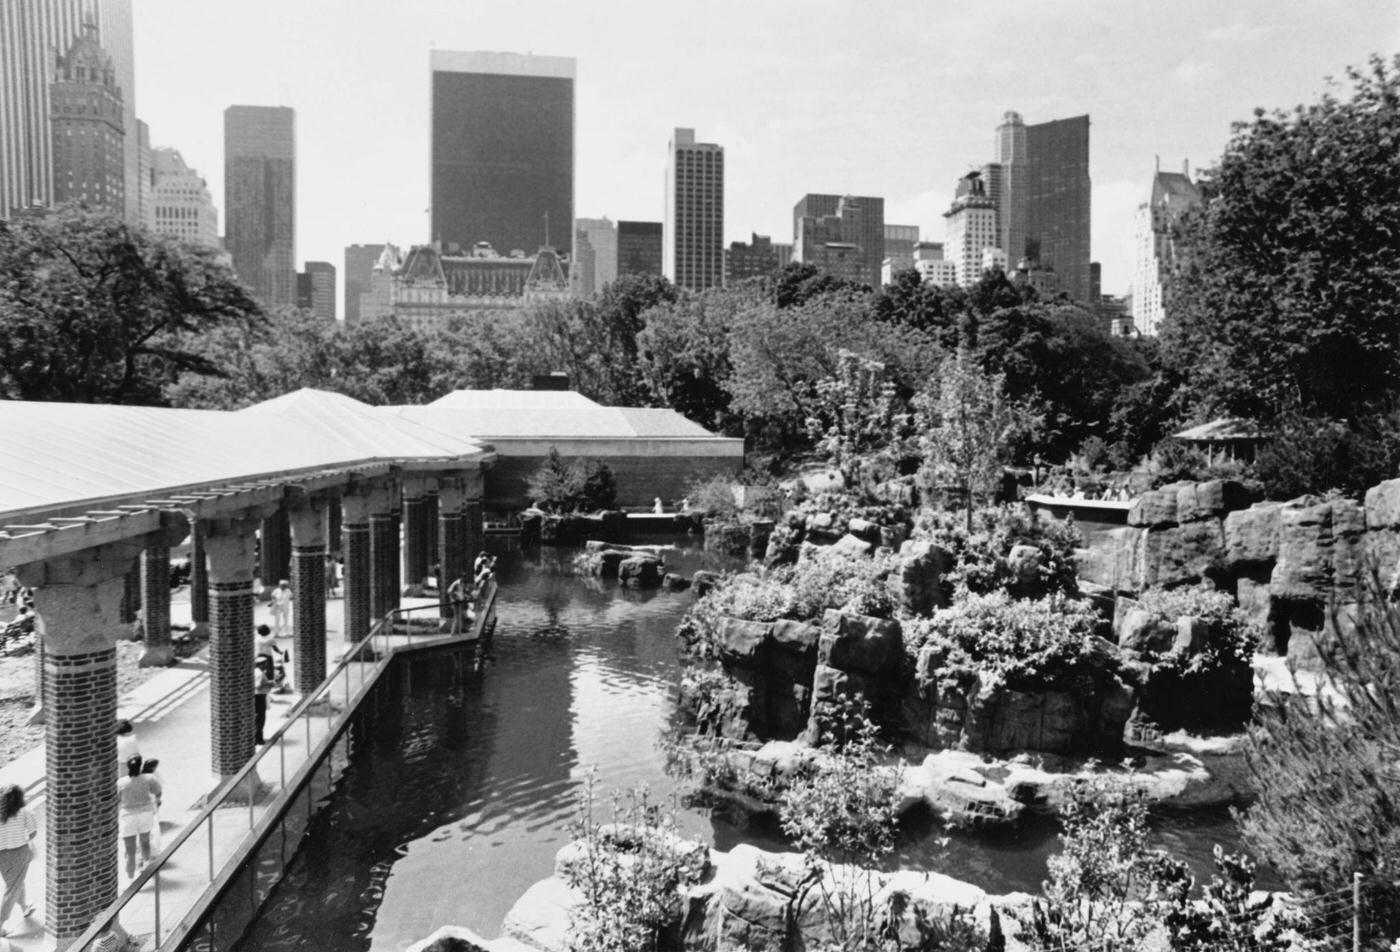 Central Park Zoo, Buildings Of Manhattan Rise Up Beyond The Sea Lion Pool, Manhattan, 1988